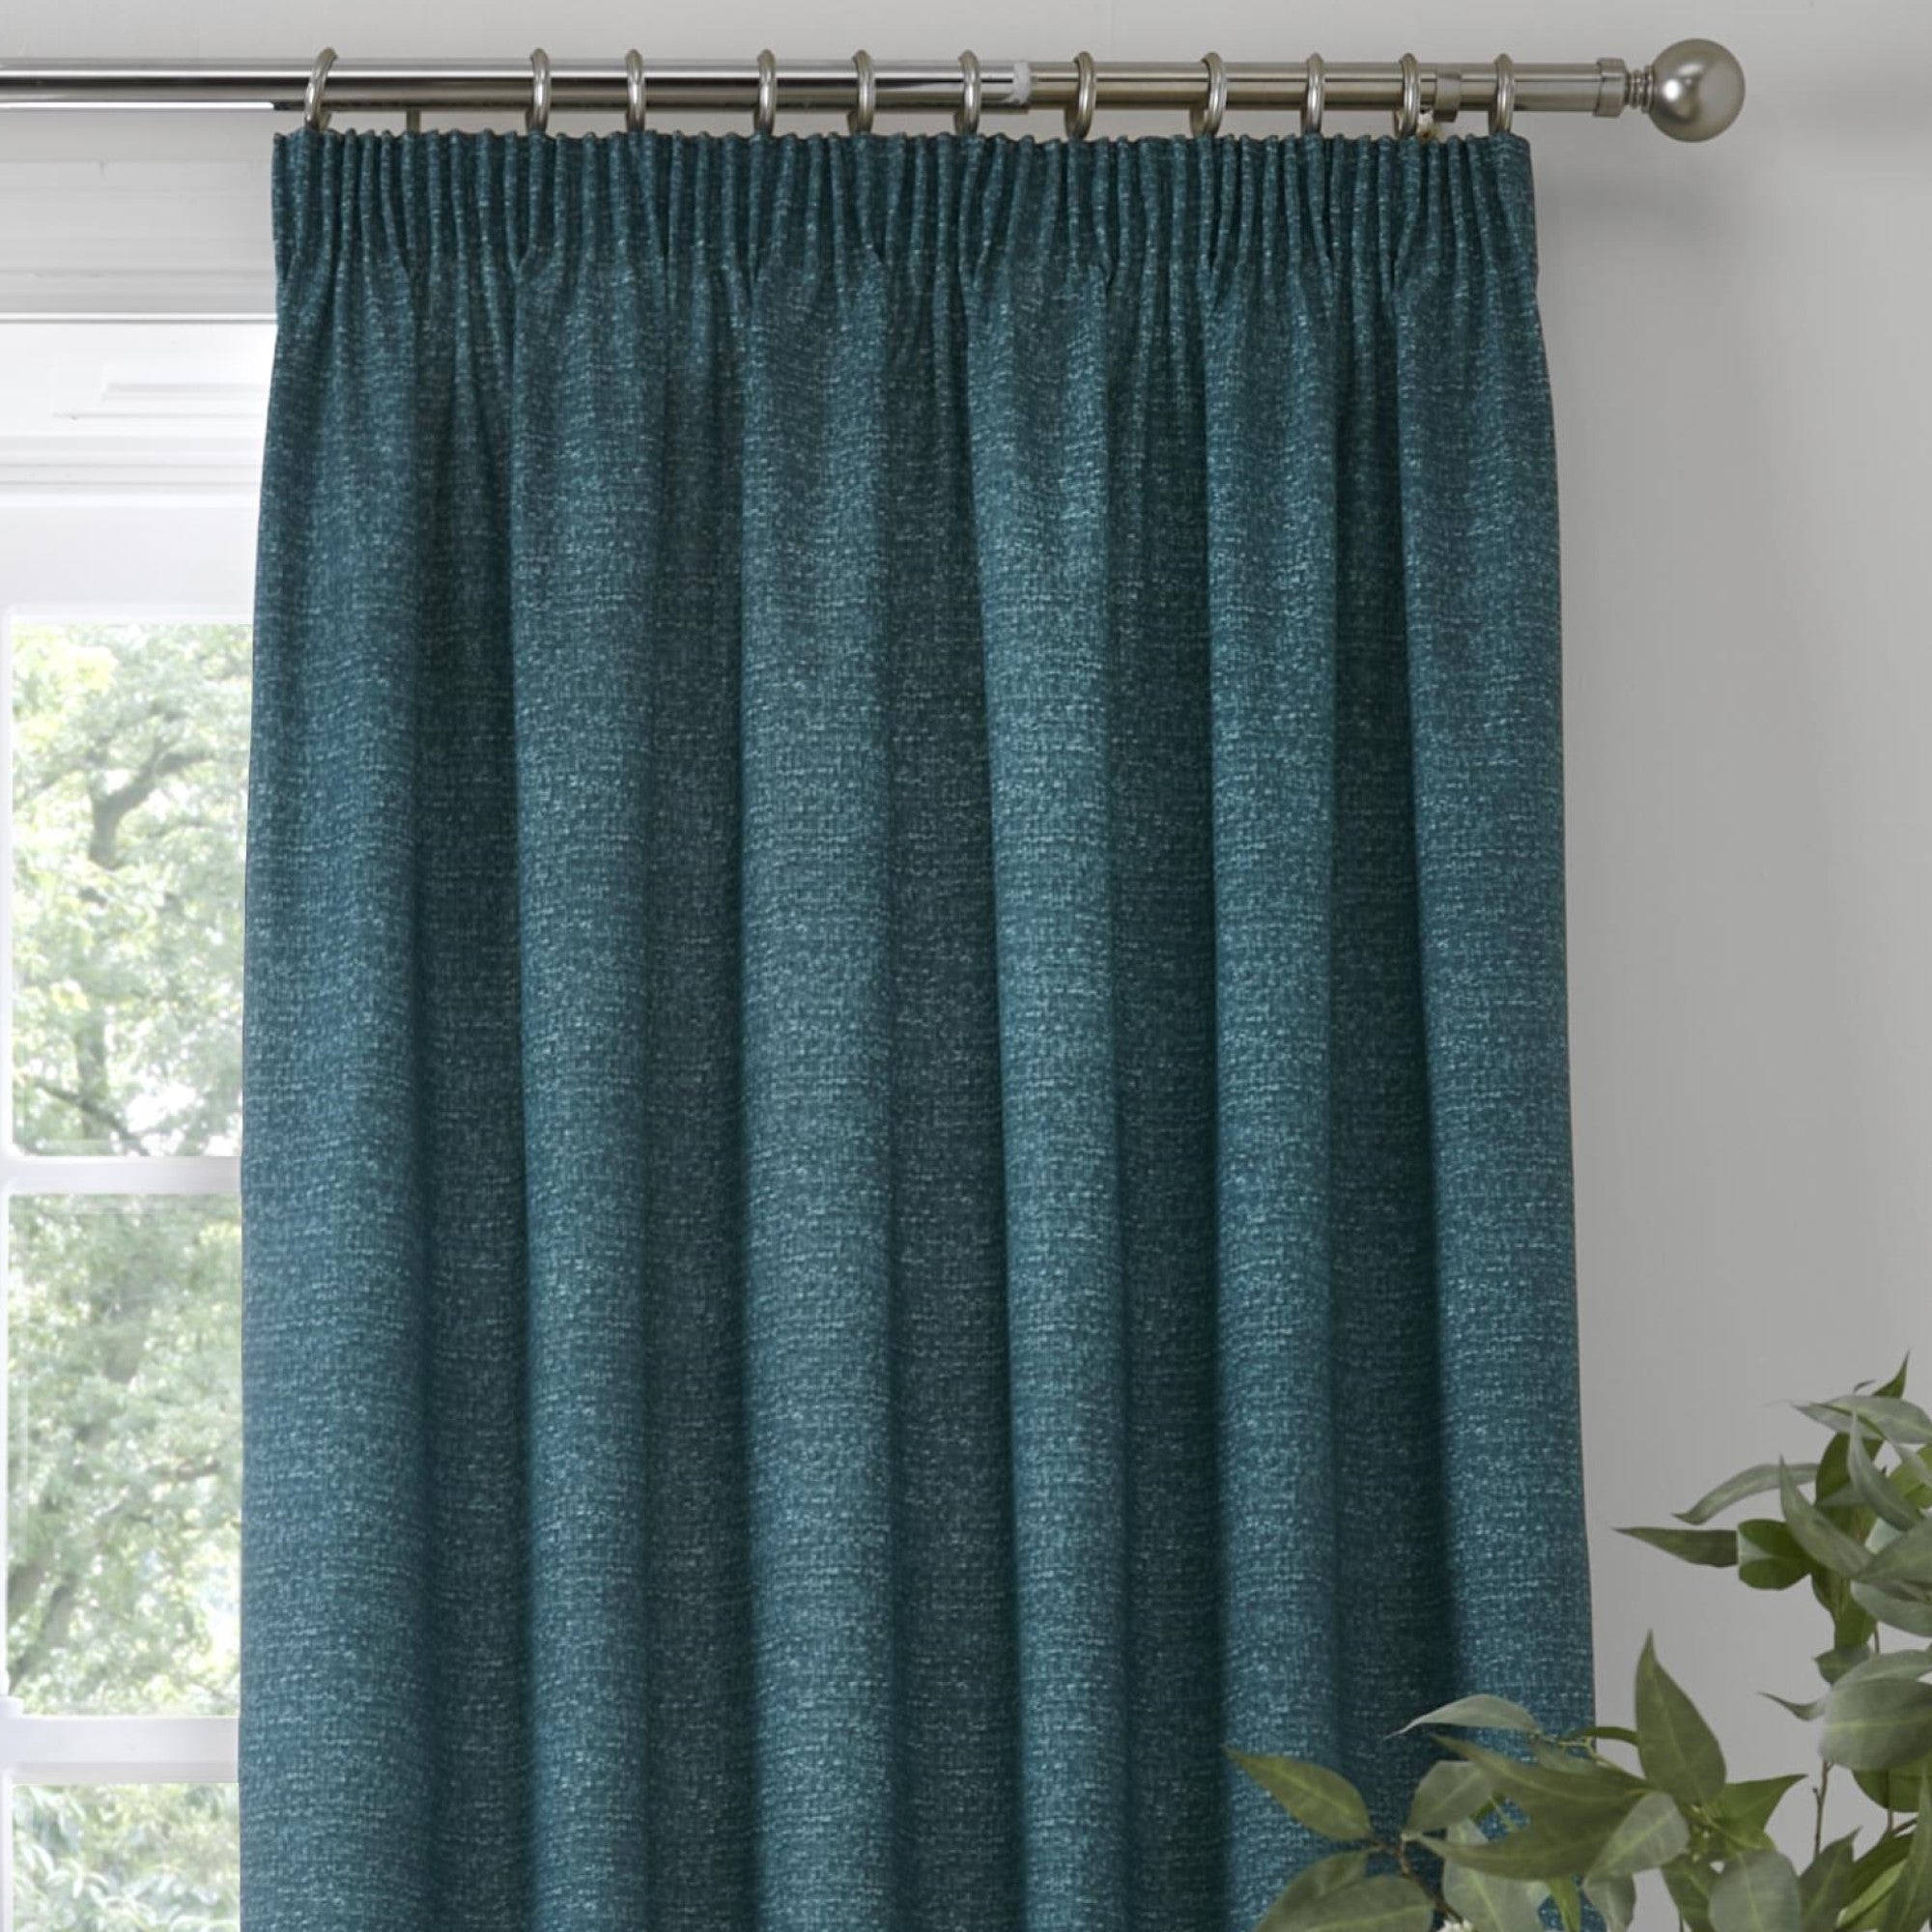 Pair of Pencil Pleat Curtains With Tie-Backs Pembrey by D&D in Teal